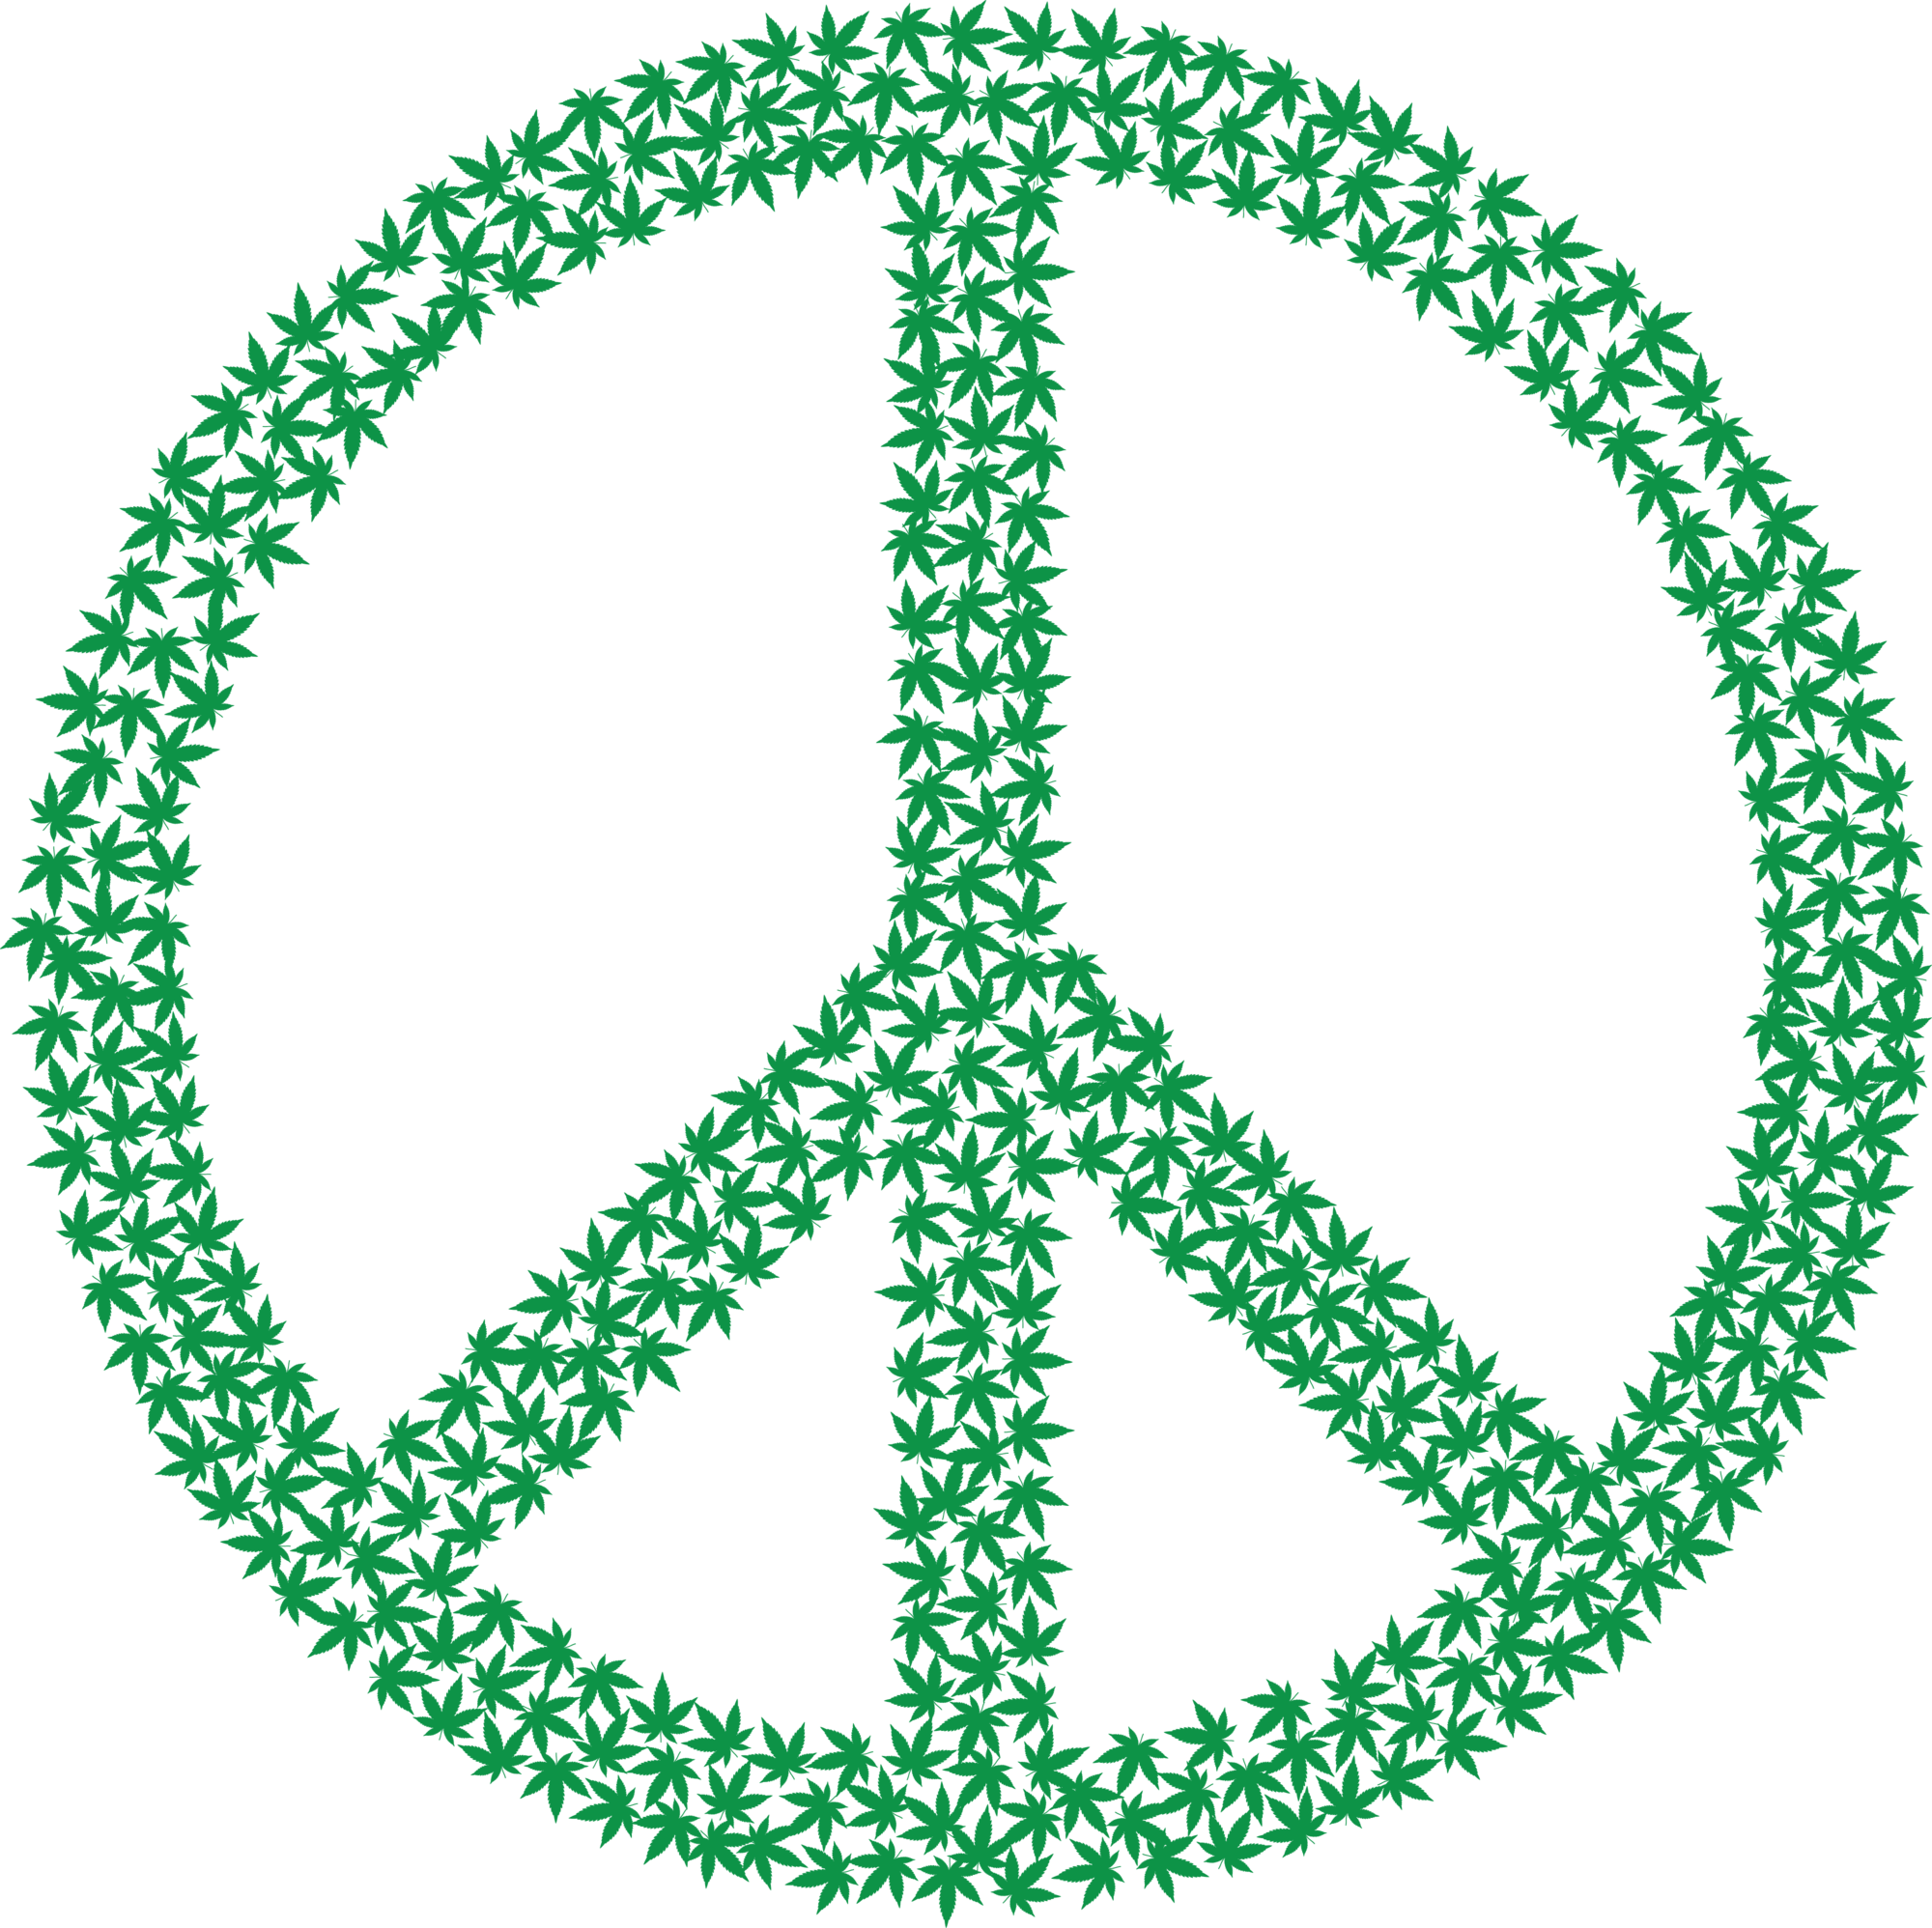 Green symbol made of. Instagram clipart peace